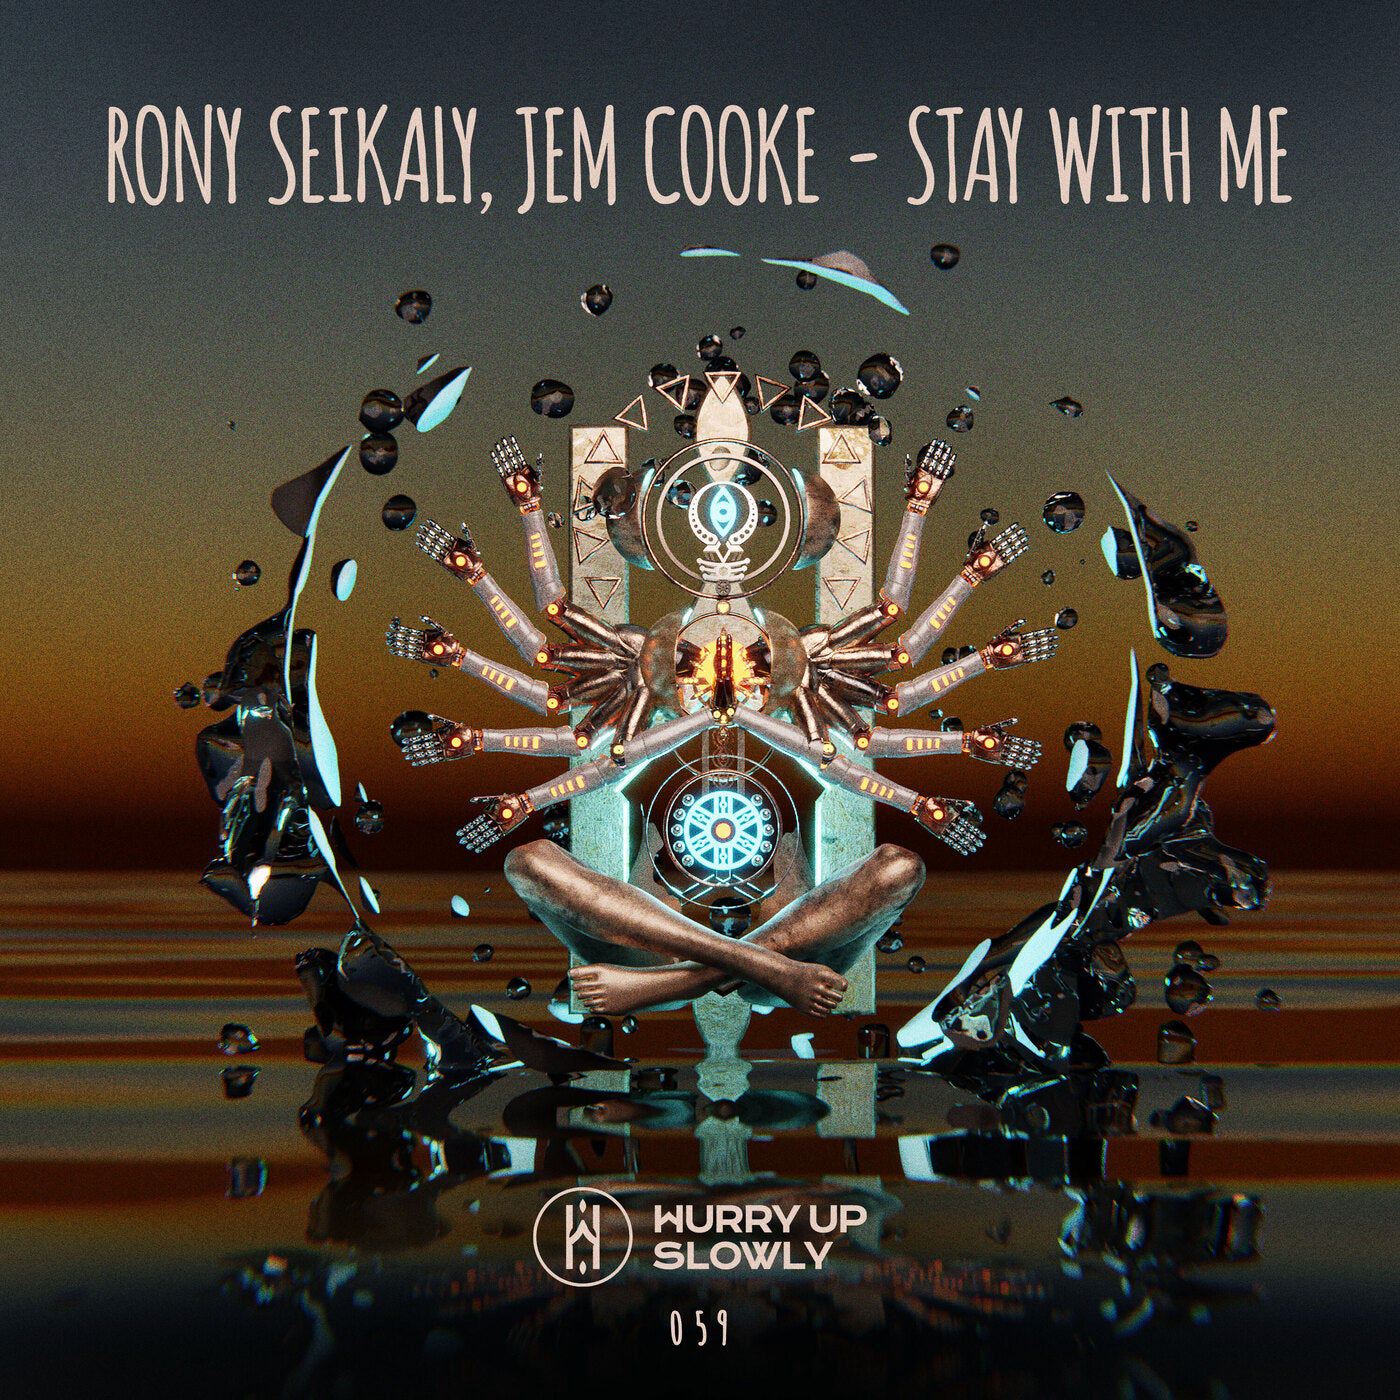 Rony Seikaly, Jem Cooke - Stay With Me